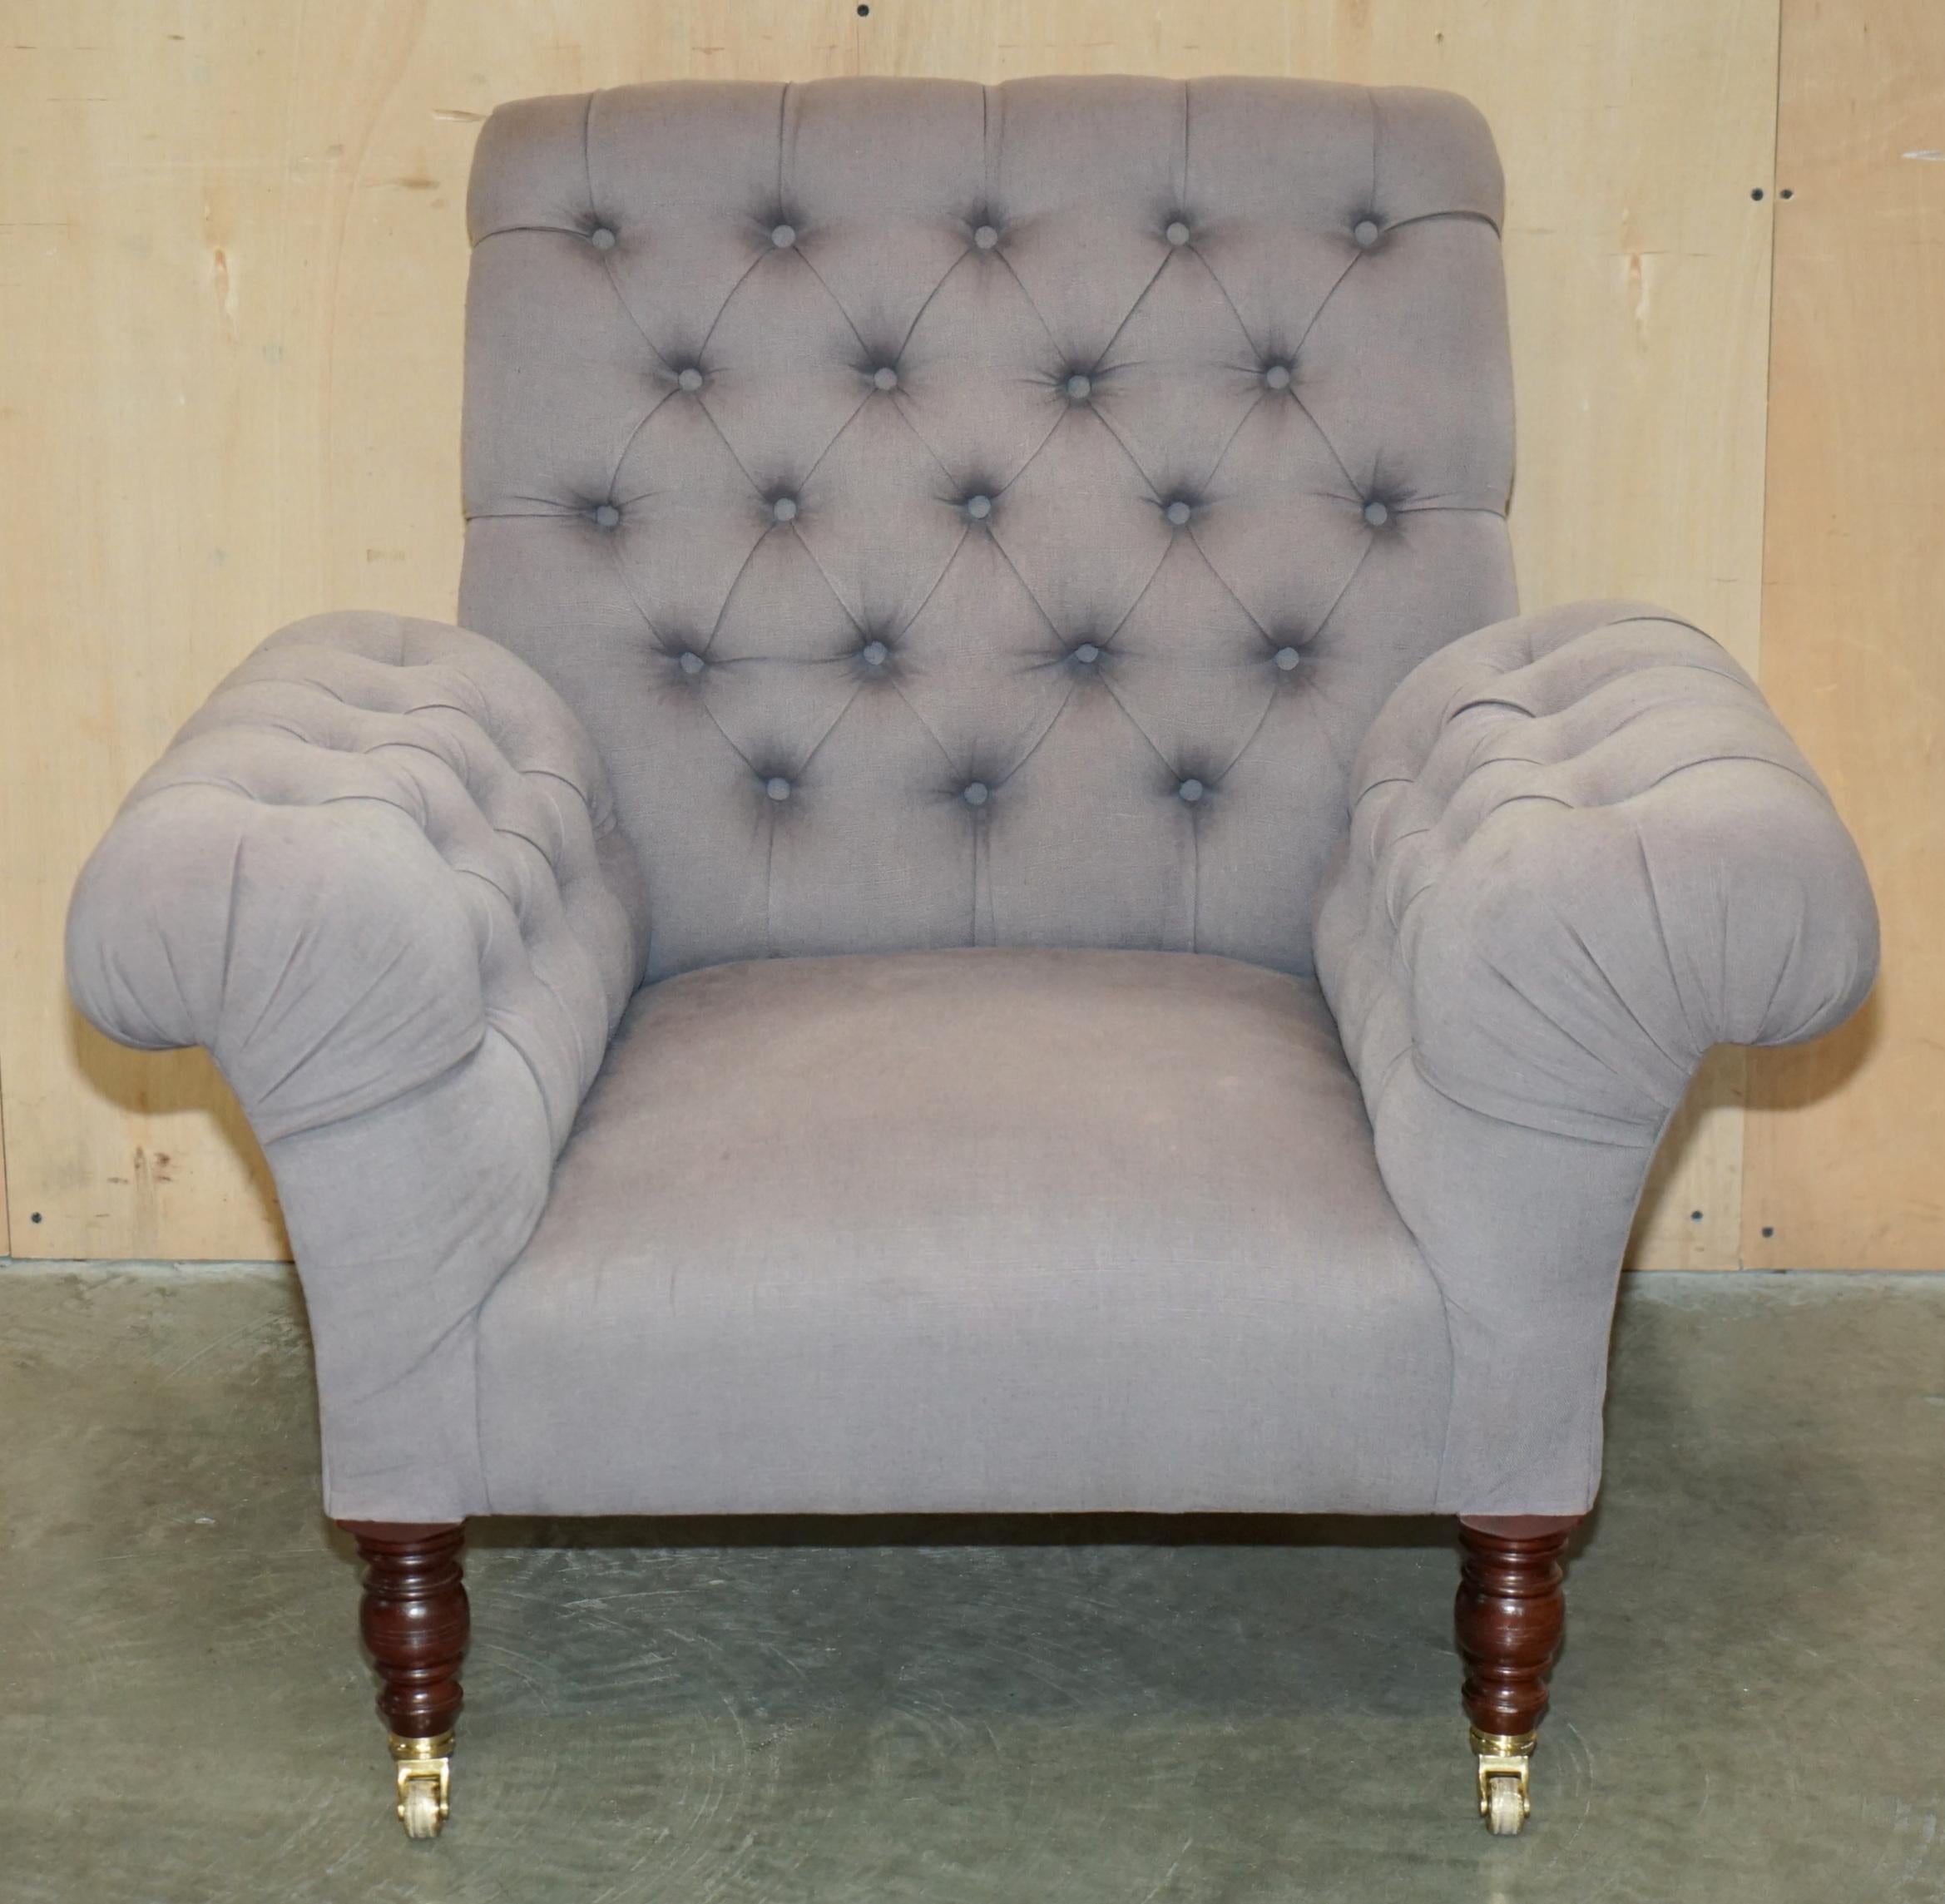 Hand-Crafted GEORGE SMITH CHELSEA BUTTERFLY GREY OATMEAL CHESTERFIELD ARMCHAiR For Sale